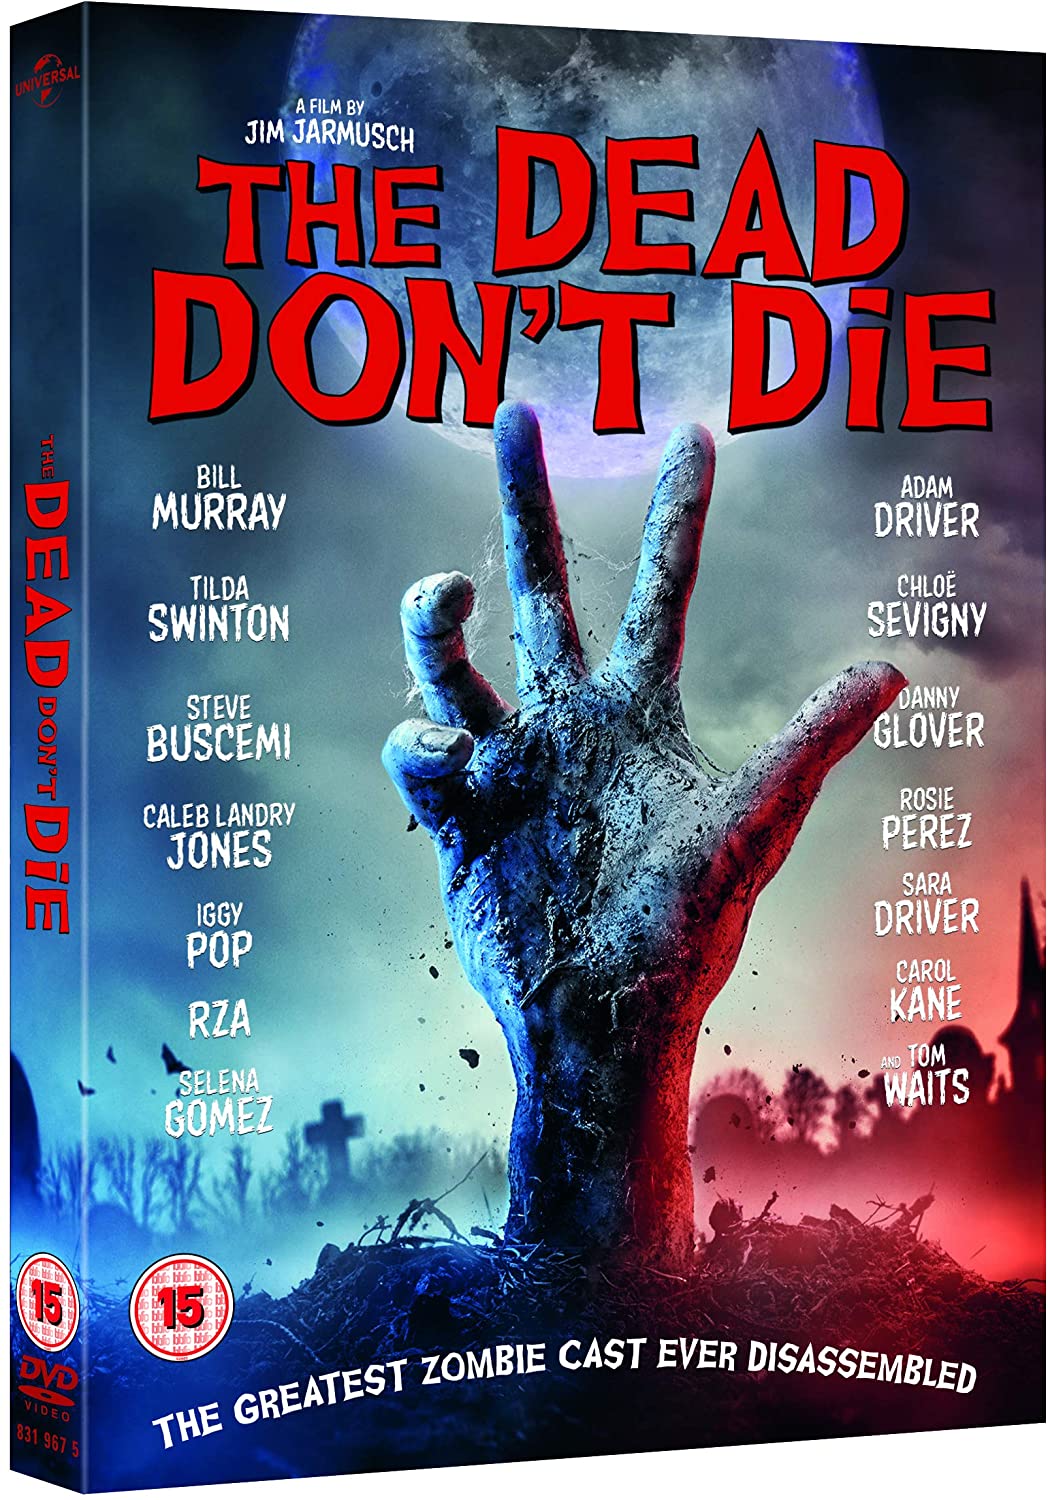 The Dead Don't Die  - Horror/Comedy [DVD]